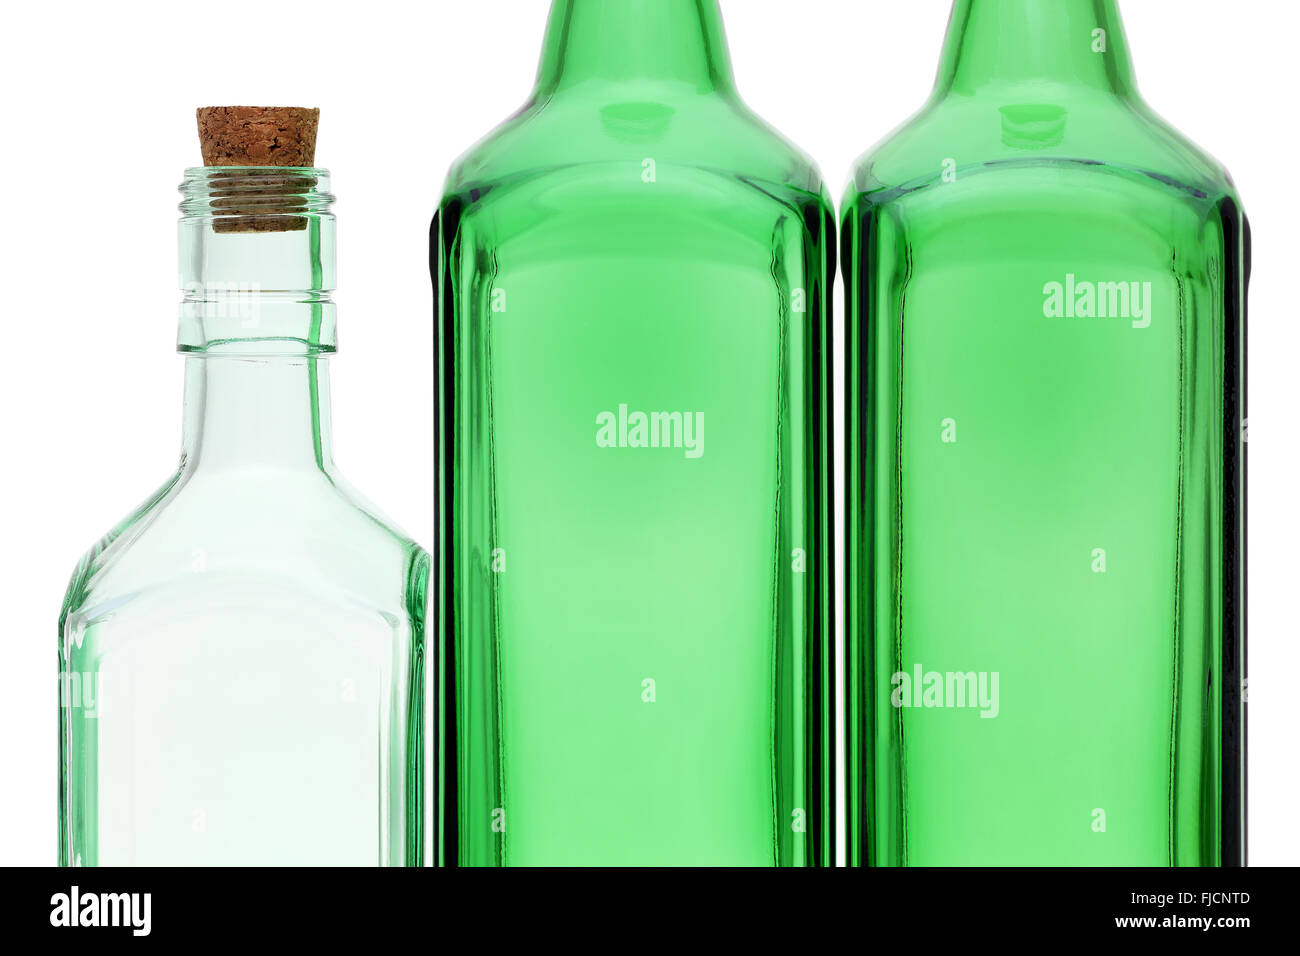 empty glass bottle with cork stopper isolated on white background Stock Photo